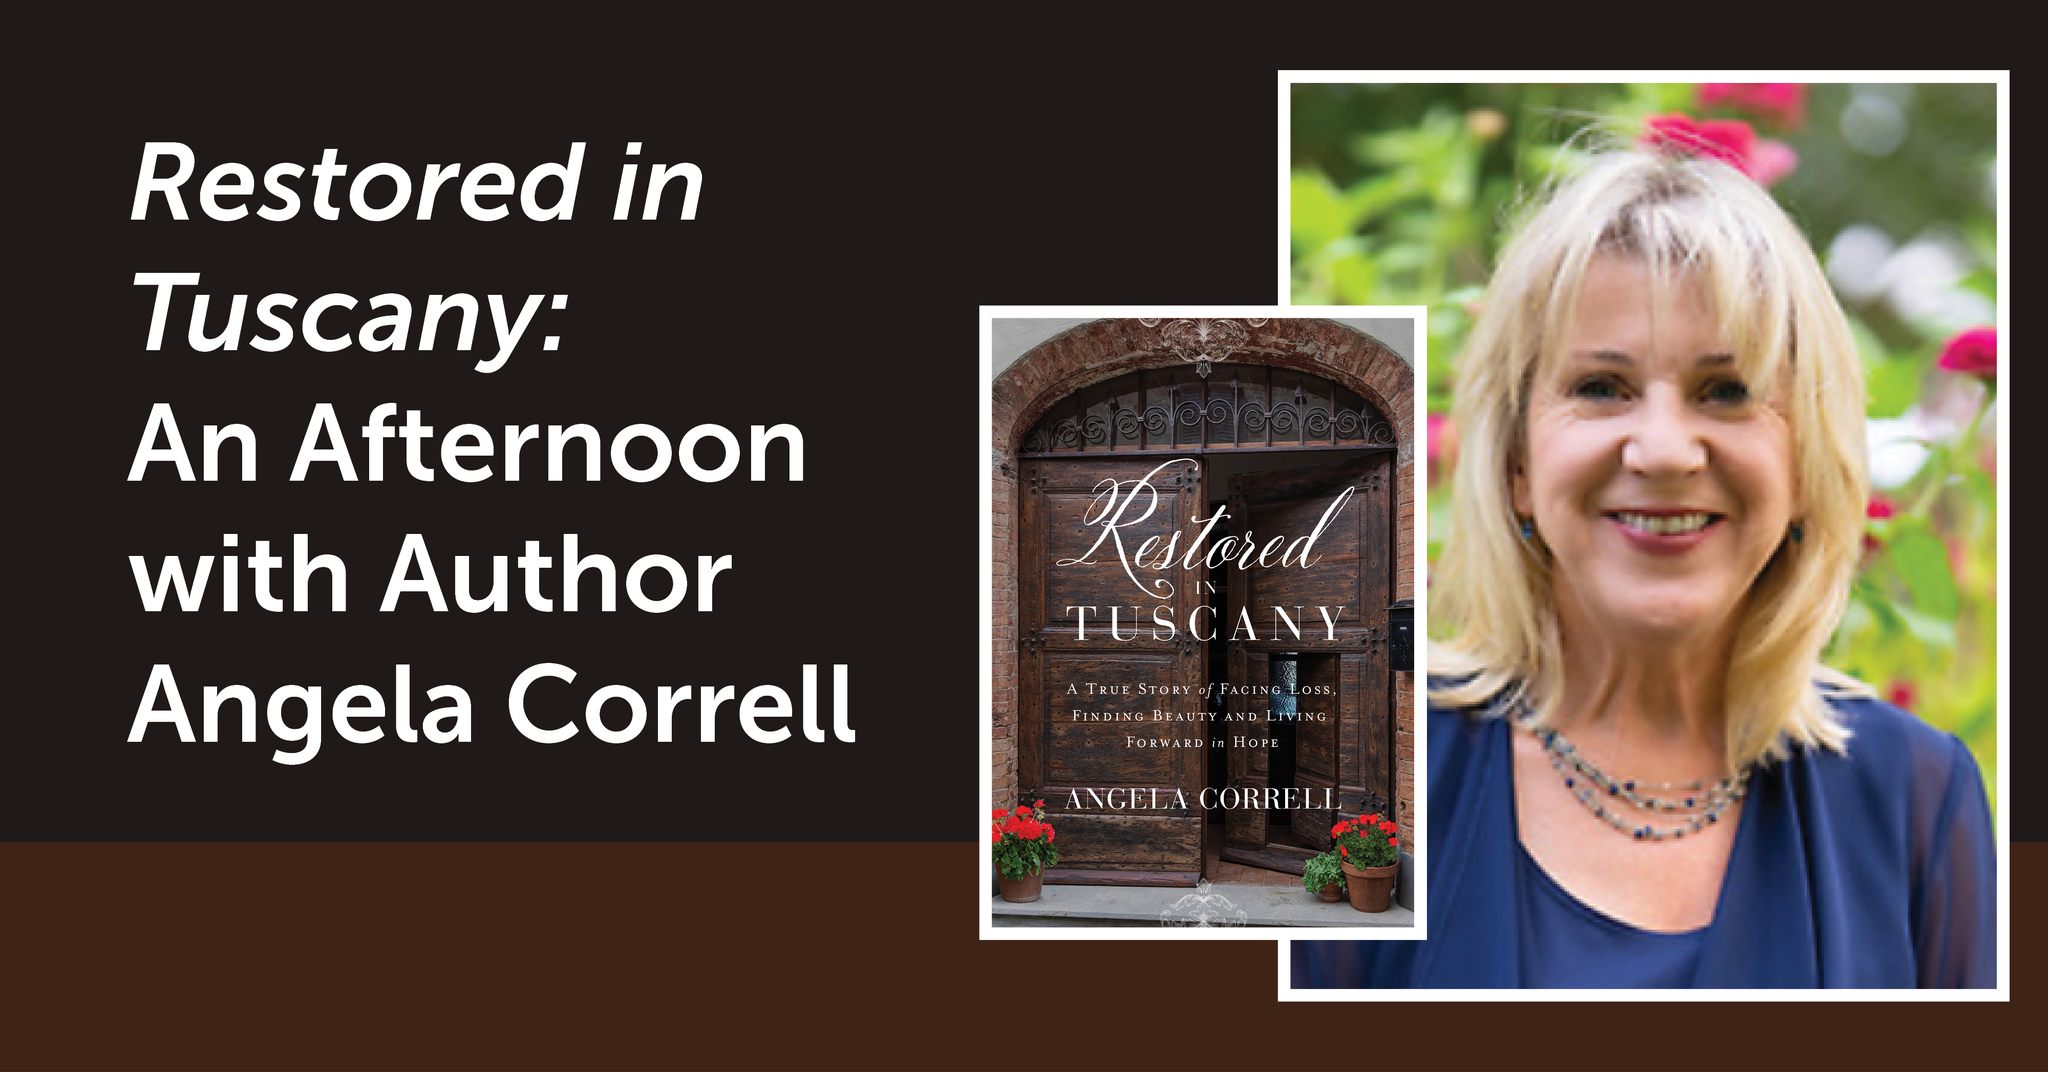 Restored in Tuscany: An Afternoon with Author Angela Correll